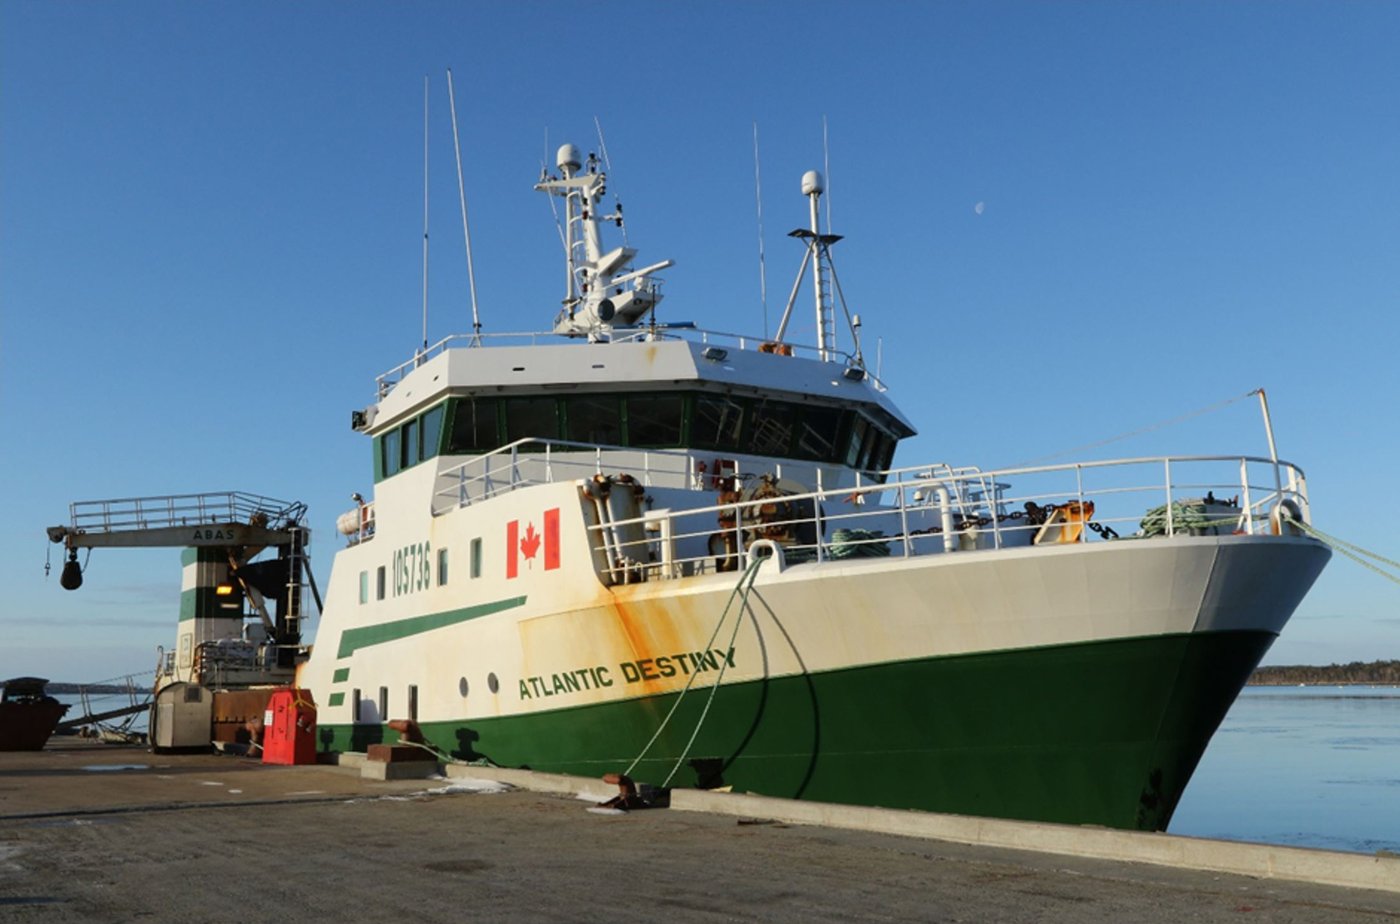 Lack of firefighting skills cited in sinking of Nova Scotia trawler that  caught fire - OHS Canada MagazineOHS Canada Magazine